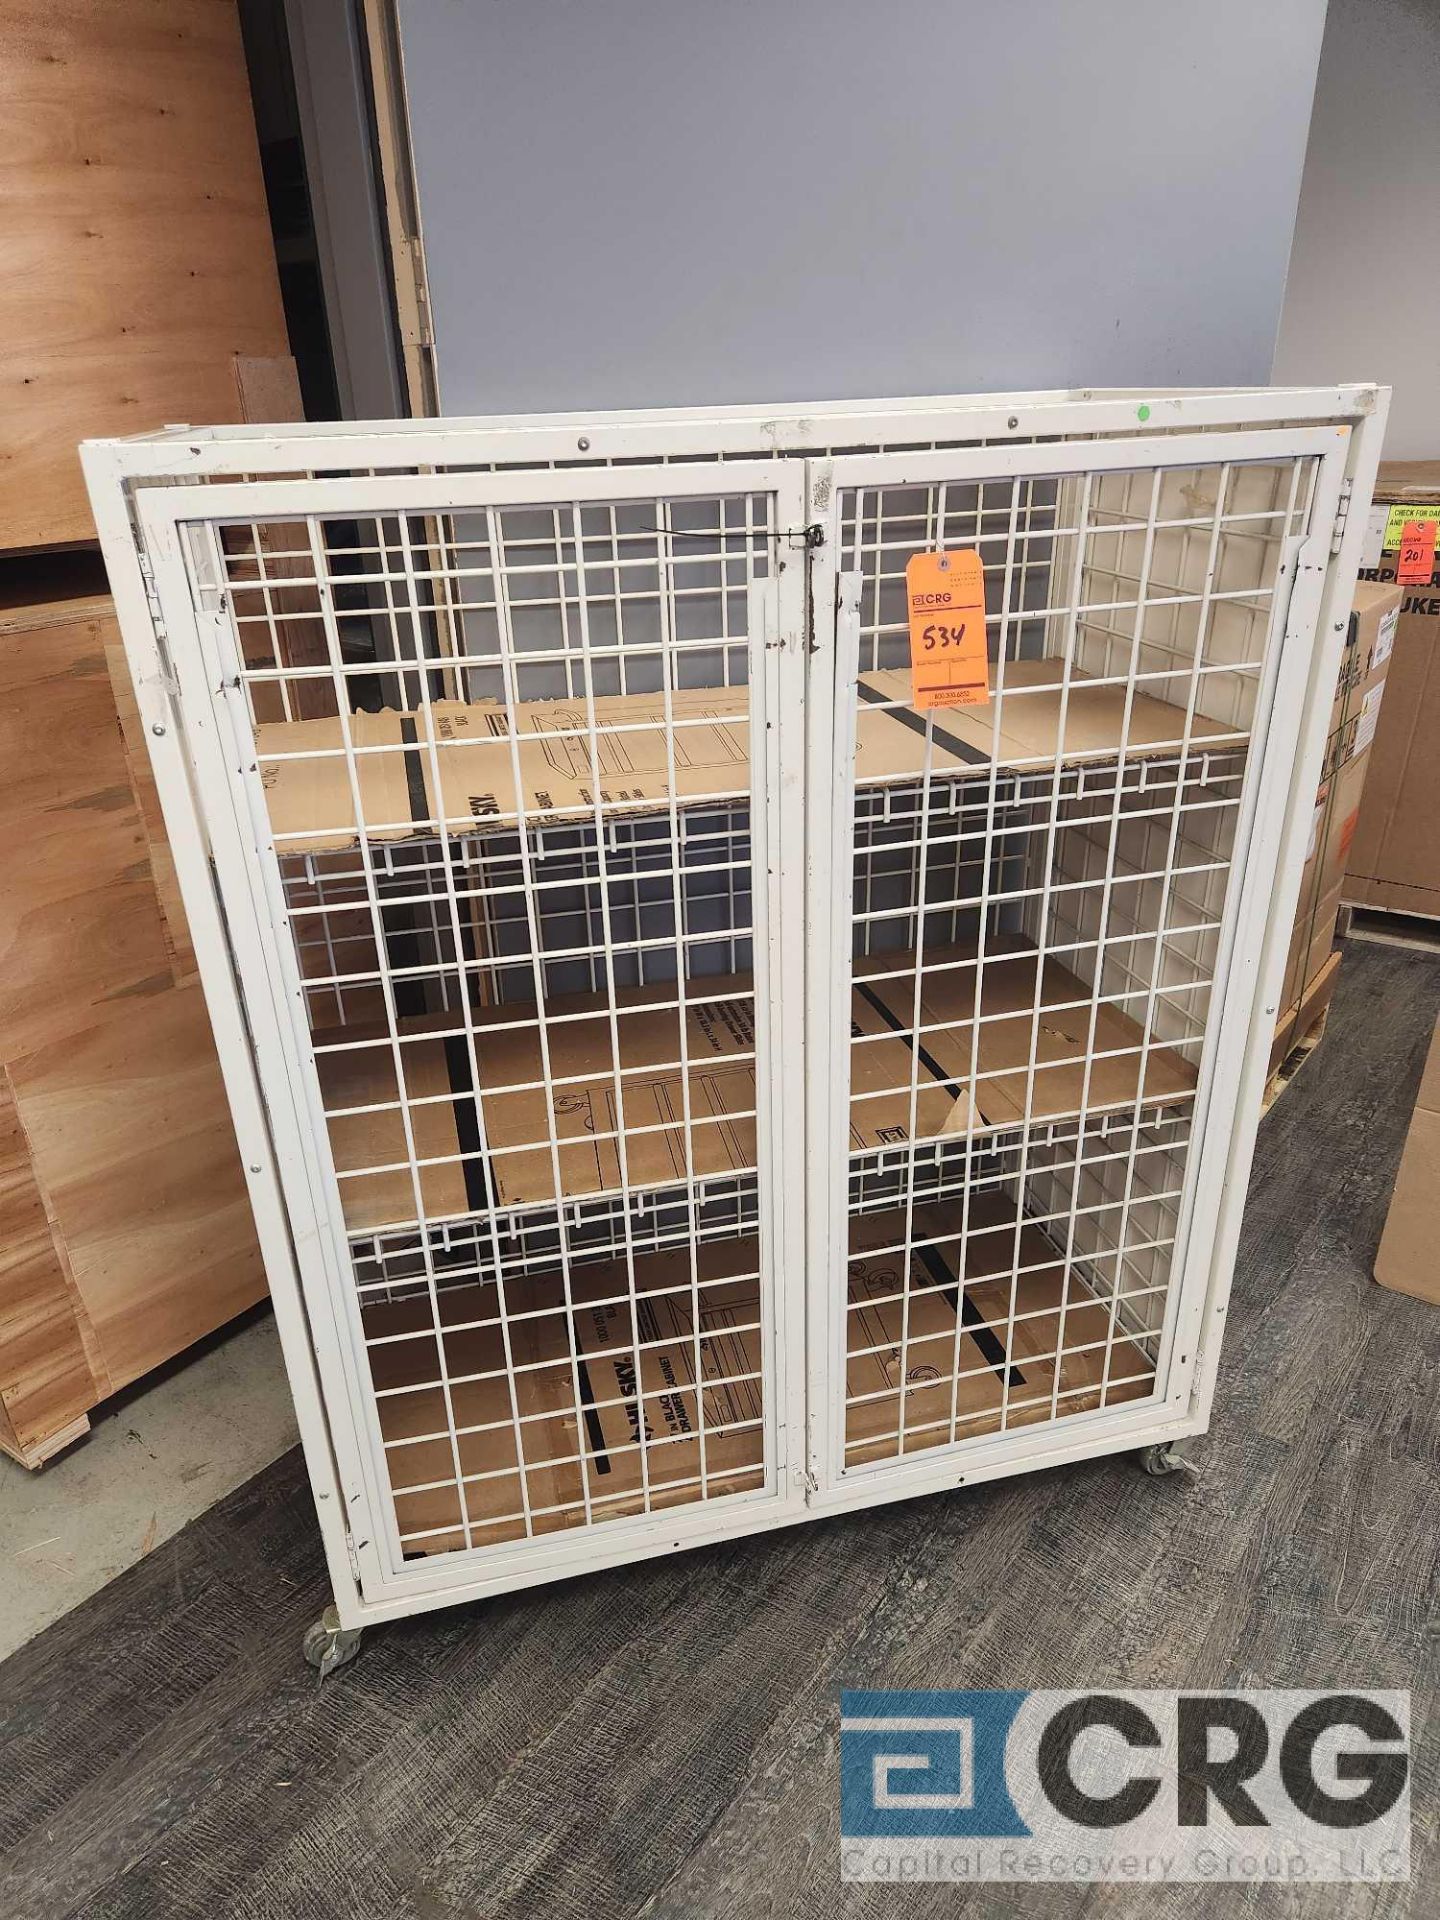 4 ft X 4 ft X 24 inch deep portable storage cage - Image 2 of 2